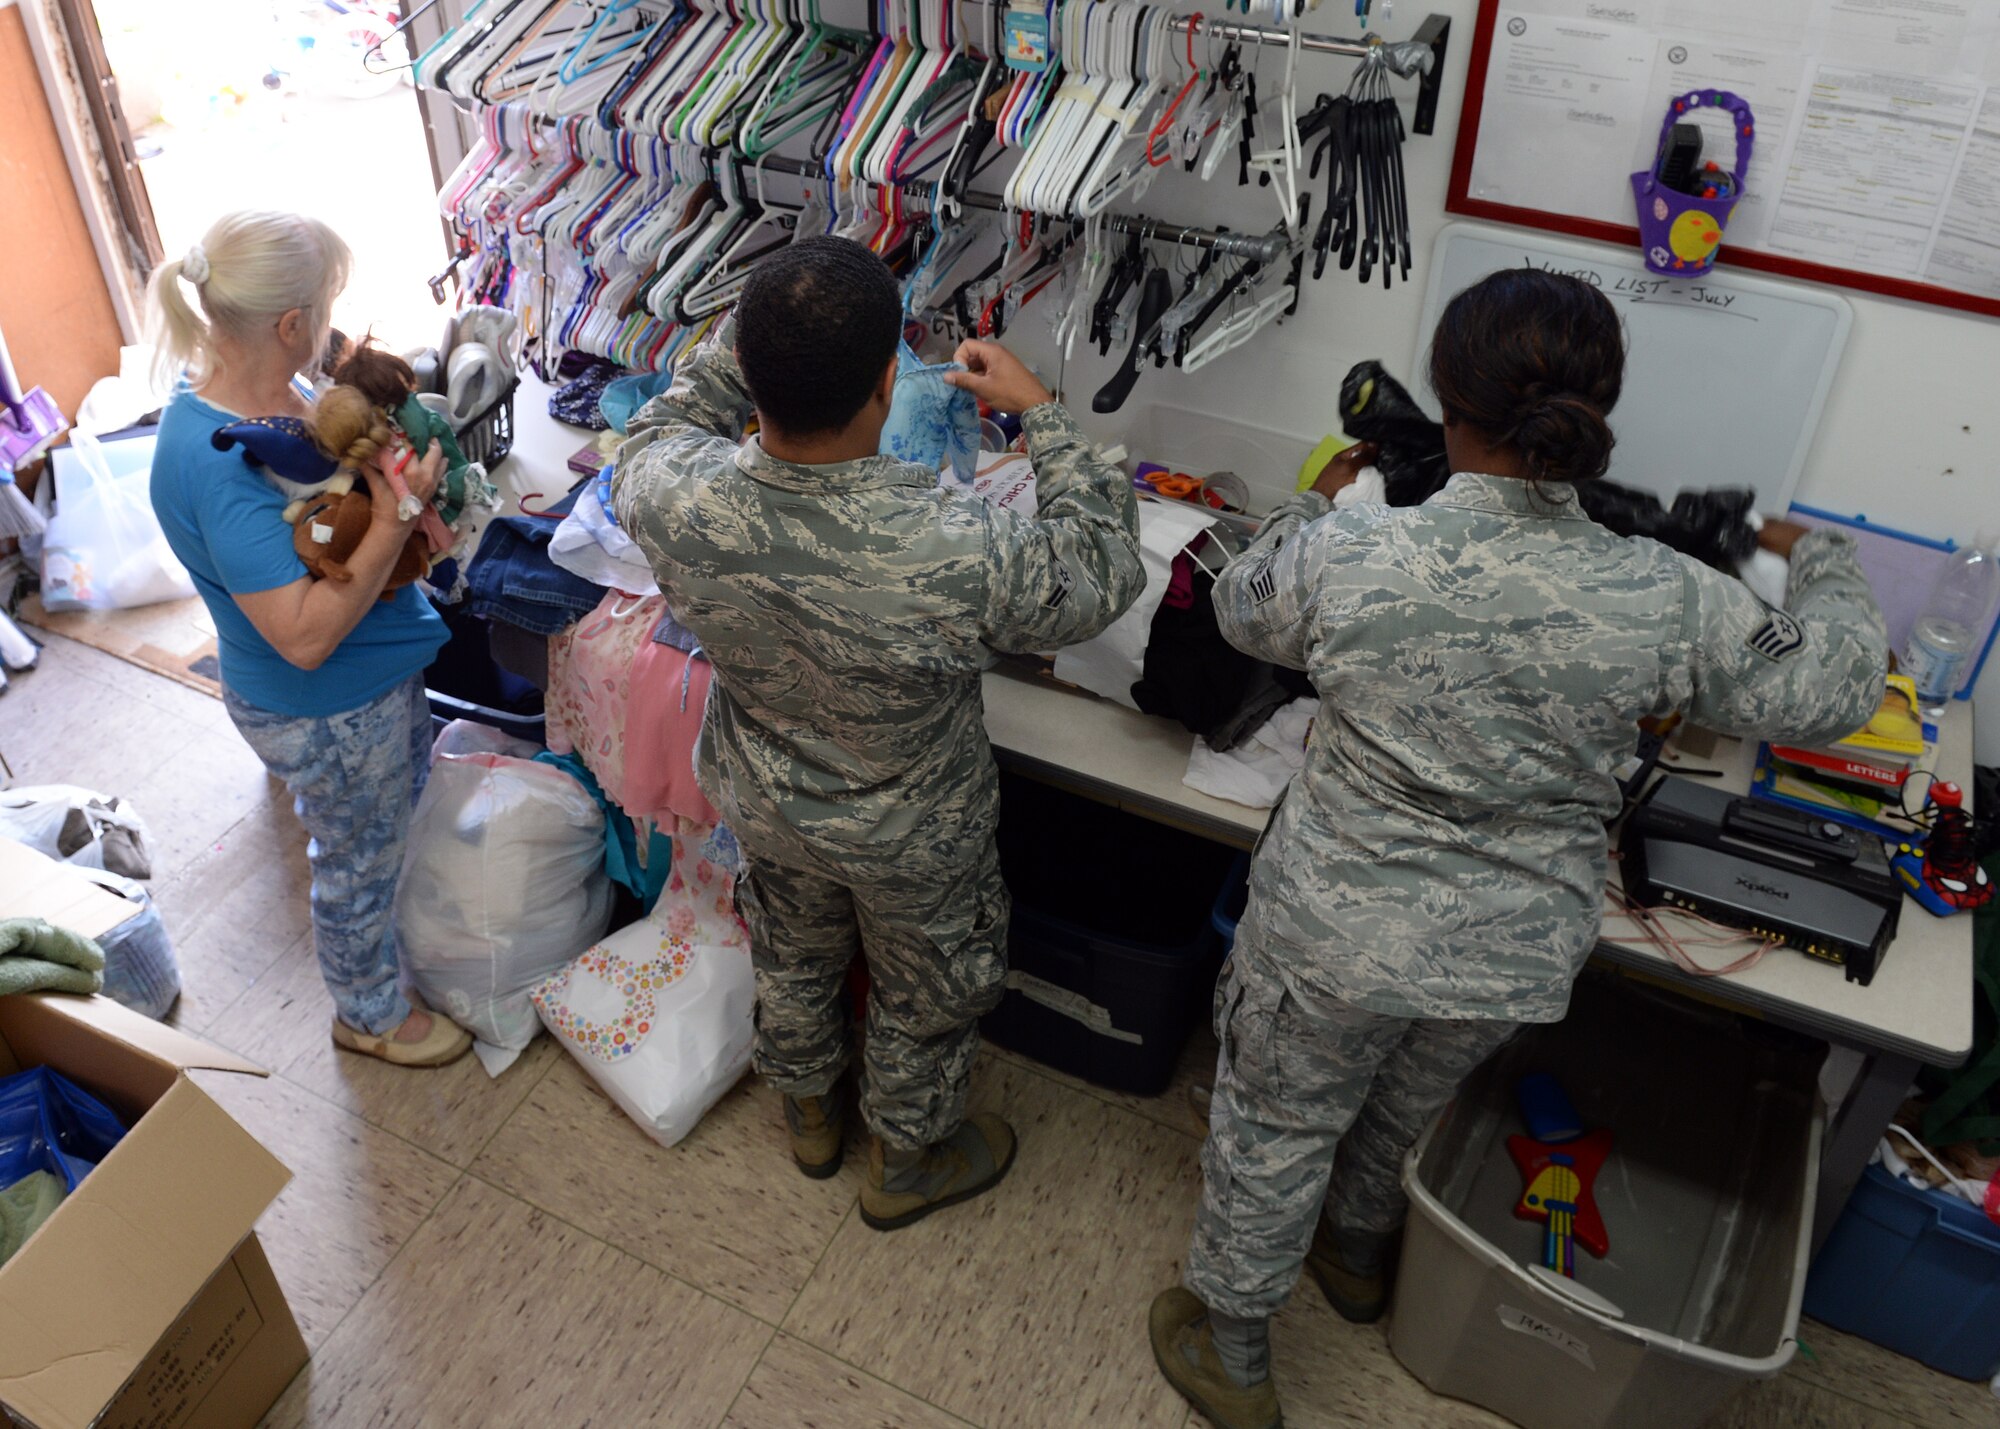 Herta Retterbush, Airman’s Attic volunteer; U.S. Air Force Airman 1st Class Solomon Wright, 606th Air Control Squadron cyber operations technician from Havre de Grace, Md.; and Staff Sgt. Debonnae Cheeks, 606th ACS cyber operations technician from Melrose Park, Ill., sort clothes and other items in the staff room of the Airman's Attic July 15, 2014, at Spangdahlem Air Base, Germany. The staff comprises an all-volunteer force from both military and civilian occupations. (U.S. Air Force photo by Staff Sgt. Daryl Knee/Released)